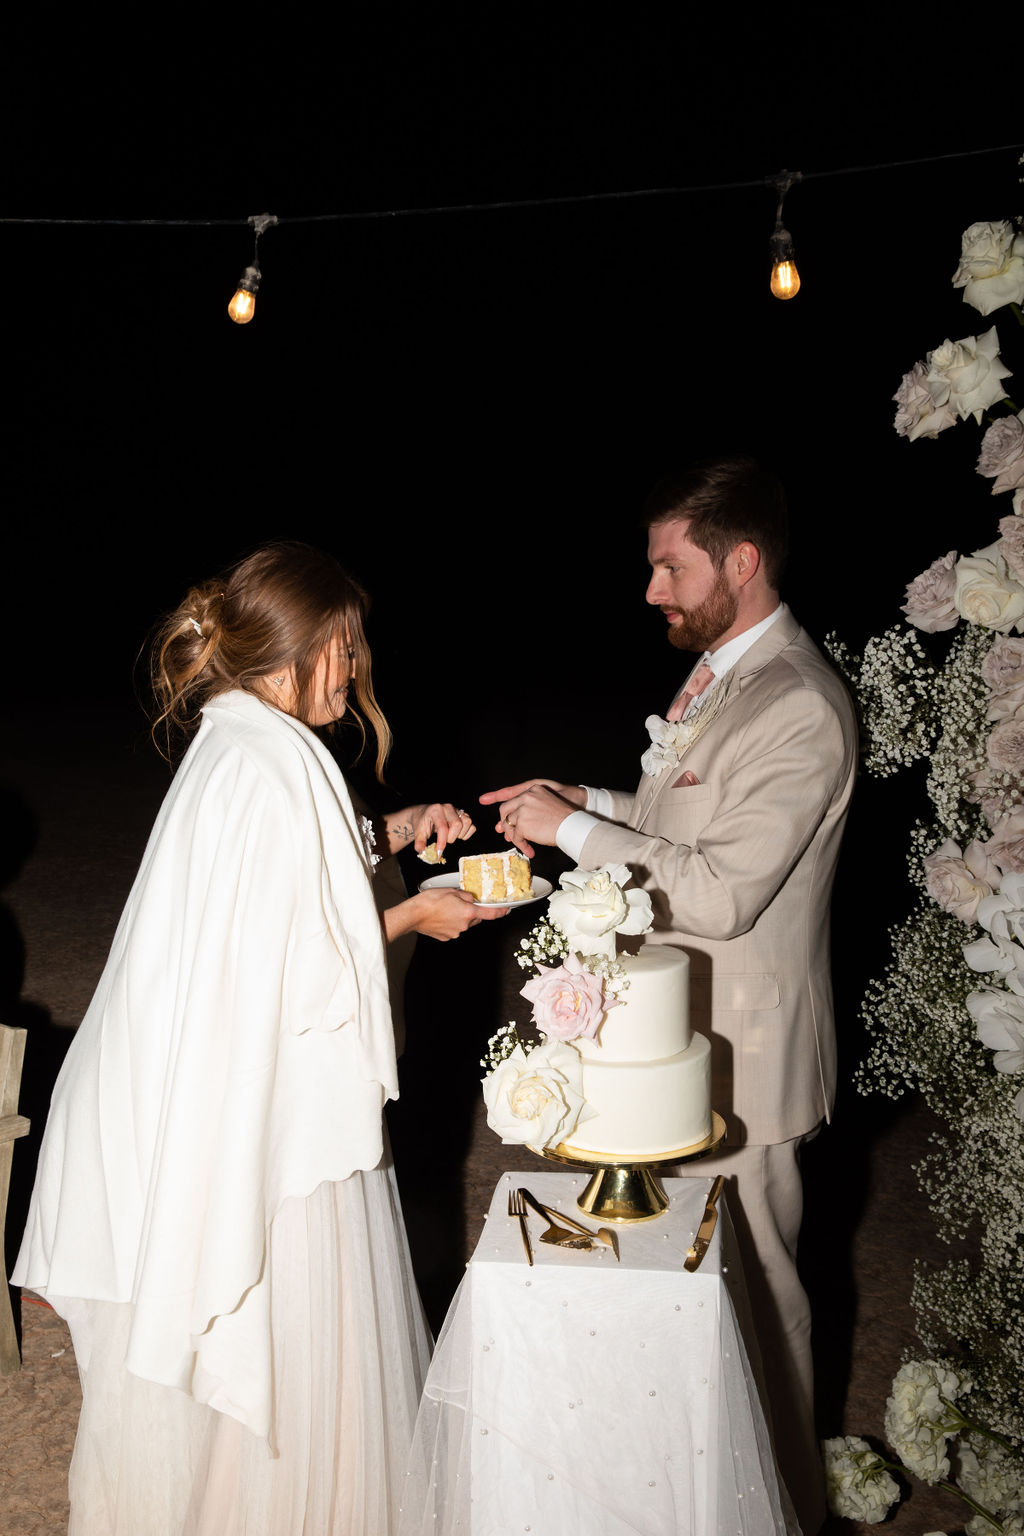 A bride and groom cut their wedding cake at night under string lights, with a guest sitting nearby.